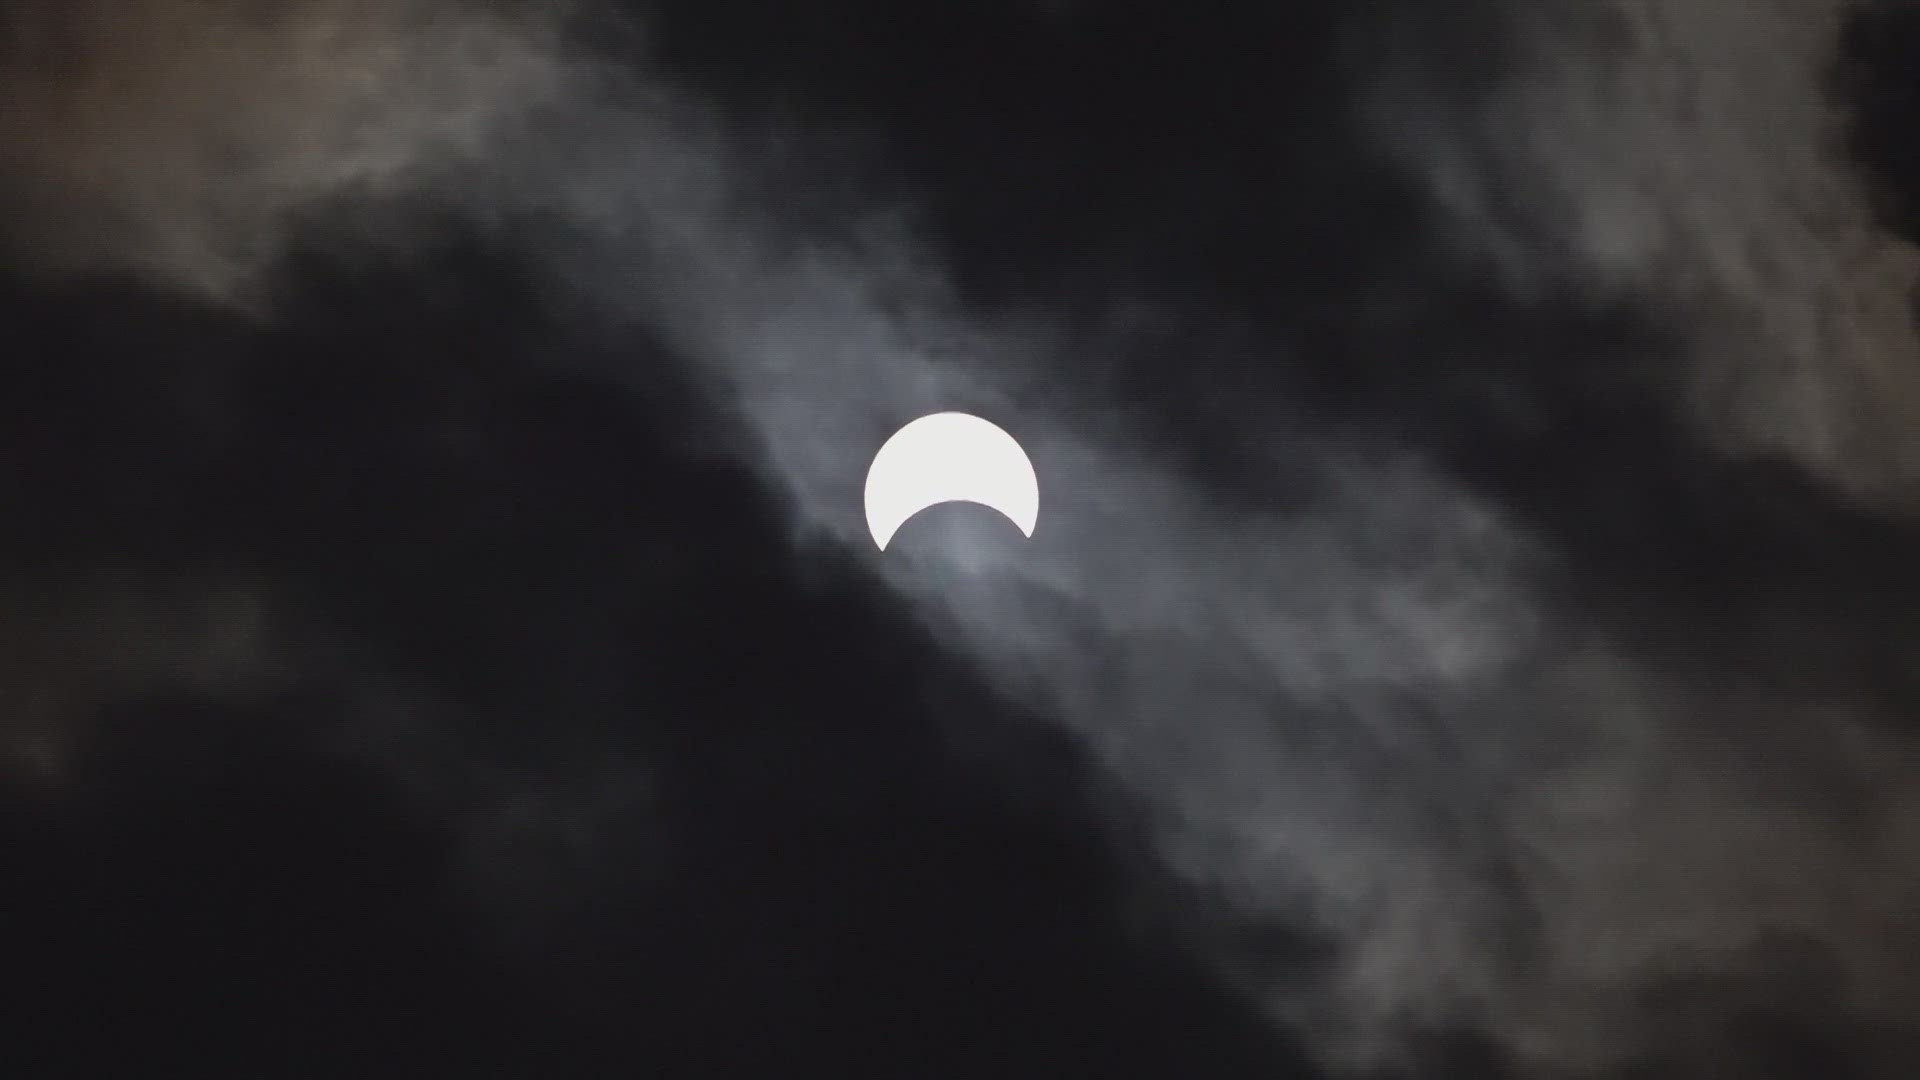 The annular solar eclipse happened Saturday afternoon and East Tennesseans were able to see nearly half of the sun covered by the moon.